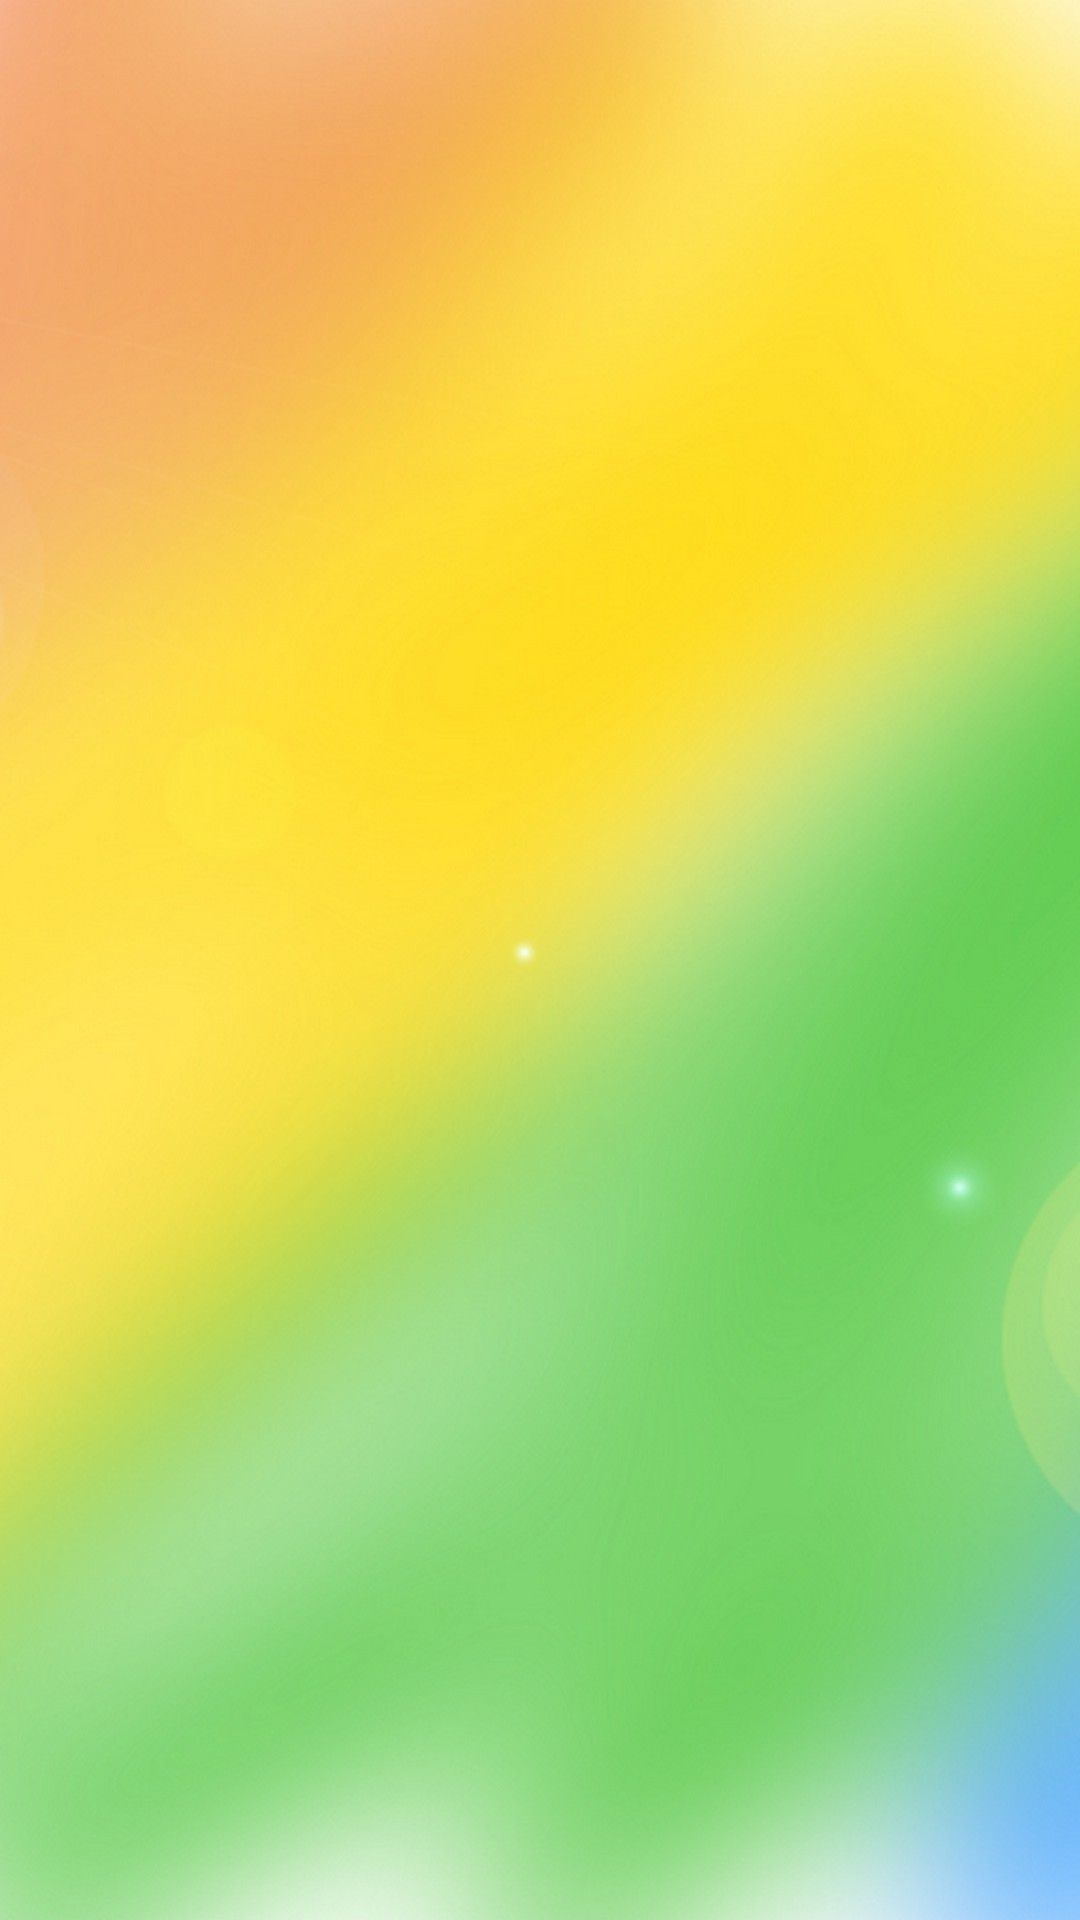 Rainbow Wallpaper Android Android Wallpaper